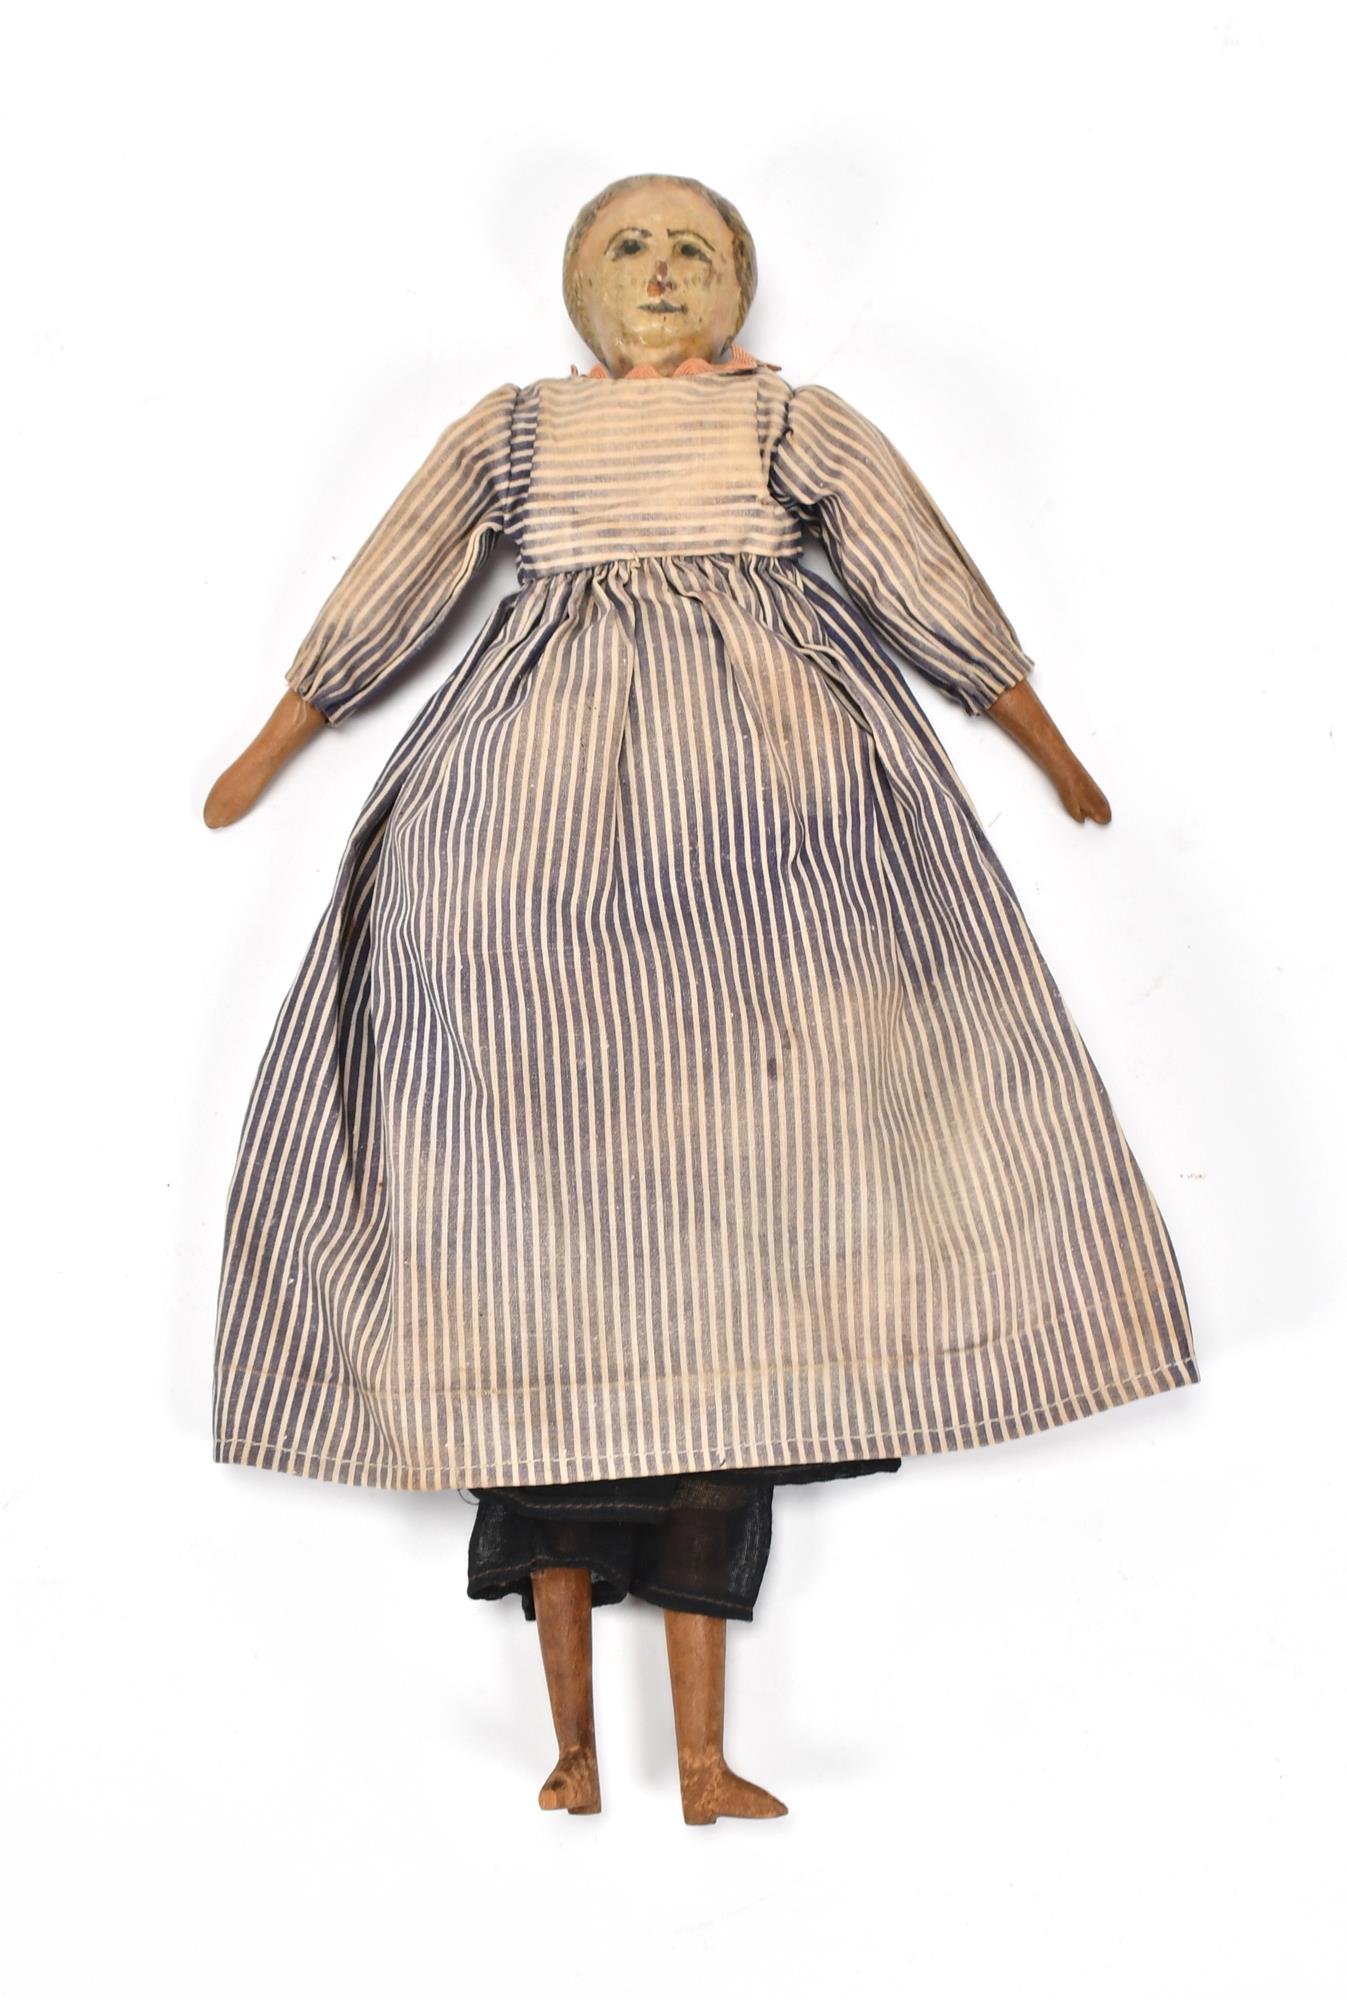 19TH C. WOOD AND FABRIC DOLL. Early